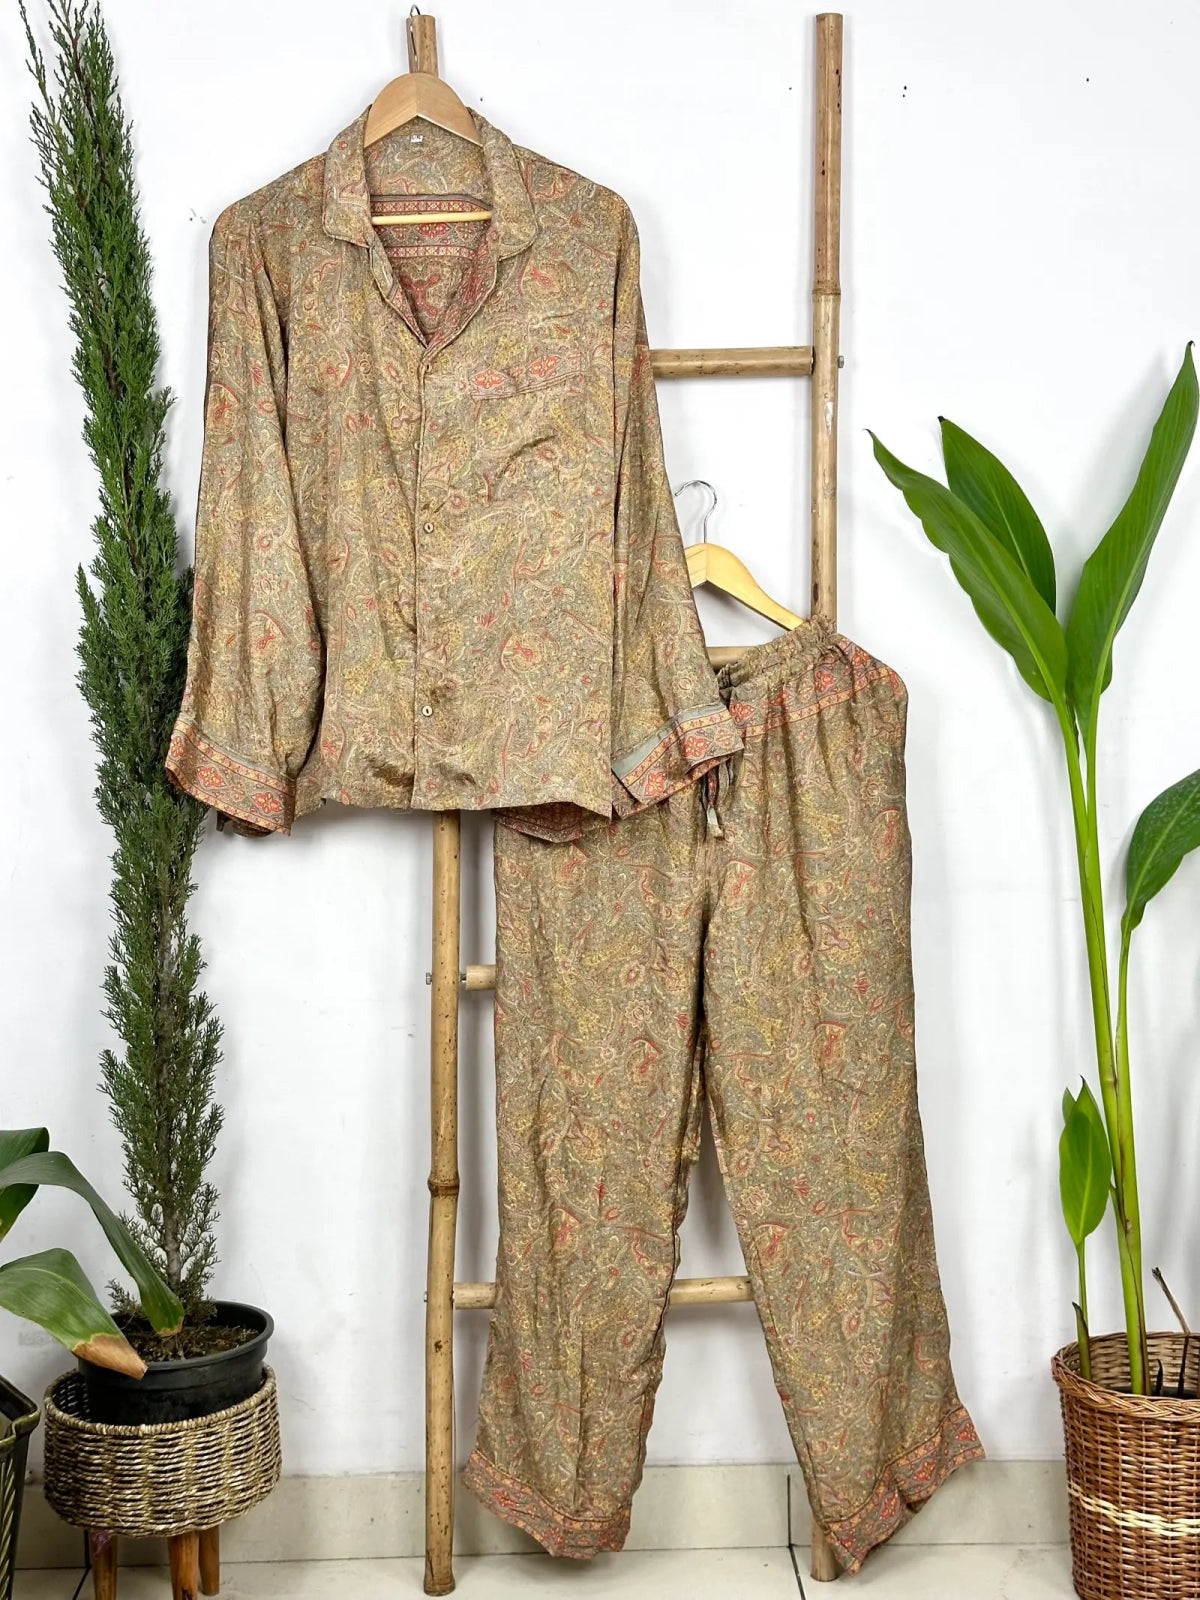 Recycle Silk Long Pajama Set, Lightweight and Breathable PJ Nightwear, Sustainable Women Girly Pajama Sleepwear Set, Silk Top and Bottom Gift for Her | L/XL Size - The Eastern Loom